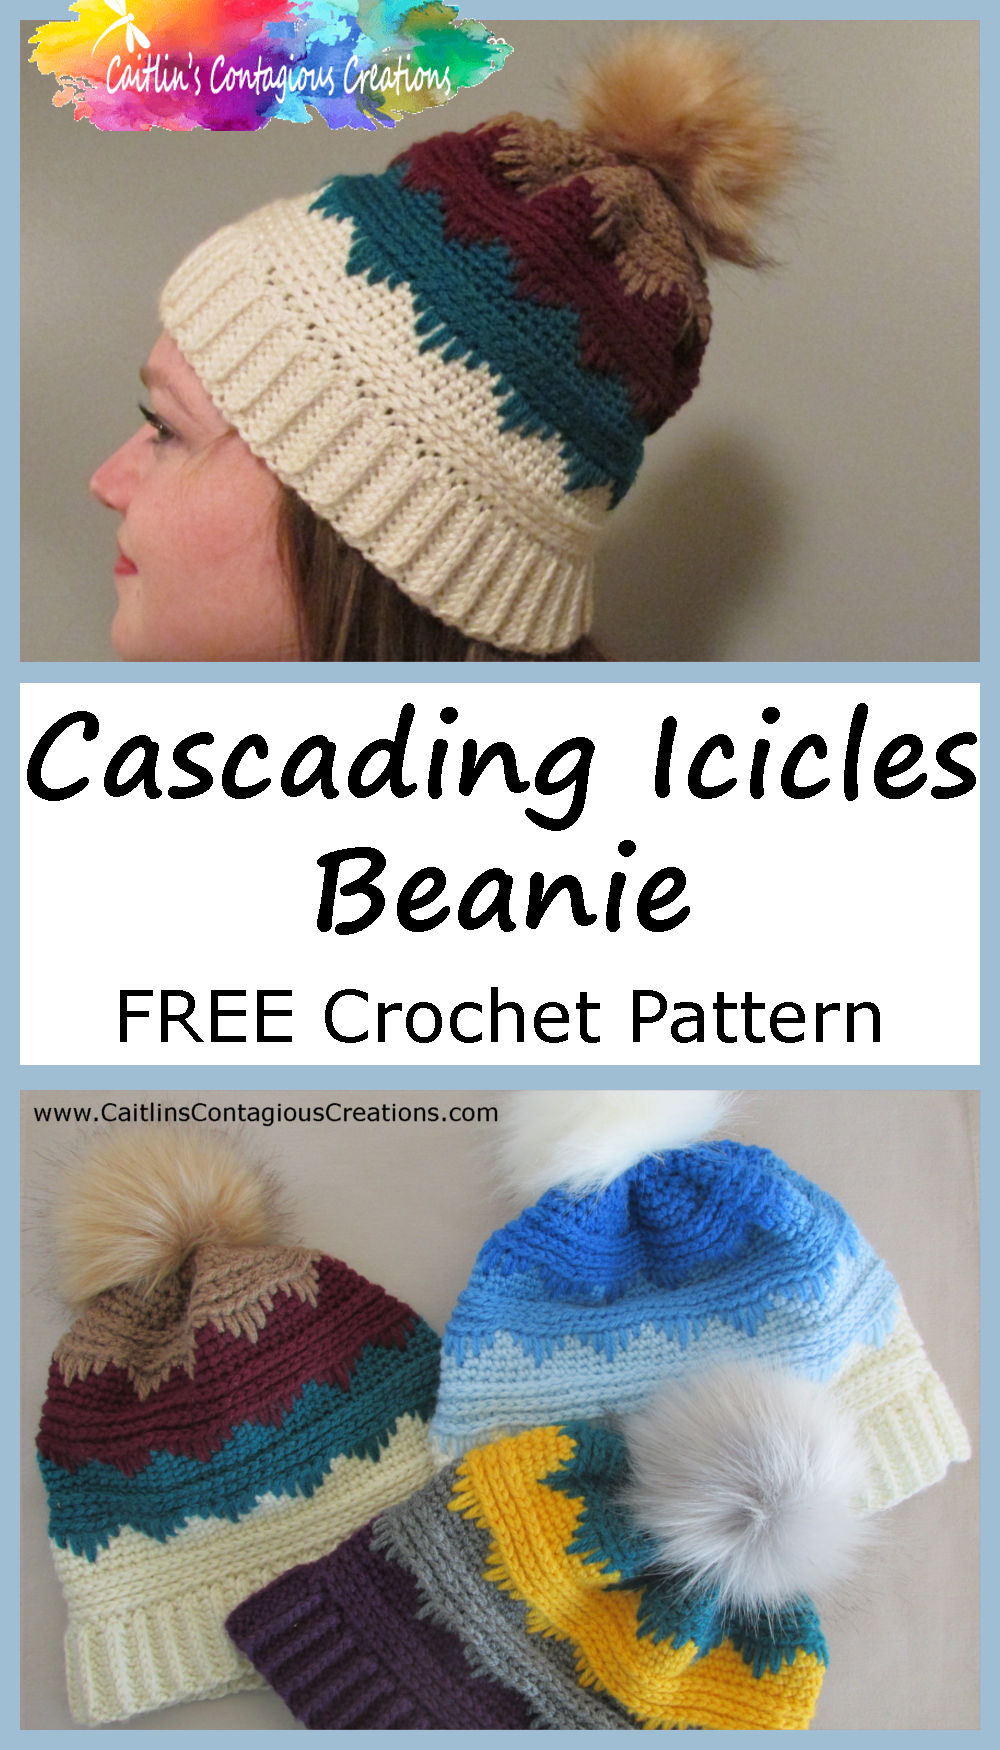 Cascading Icicles Beanie Crochet Pattern from Caitlin's Contagious Creations includes options for 3 adult sizes, and can be either a winter cap or a ponytail messy bun hat. The design features written directions and step by step photo instructions. Check It Out Now!!